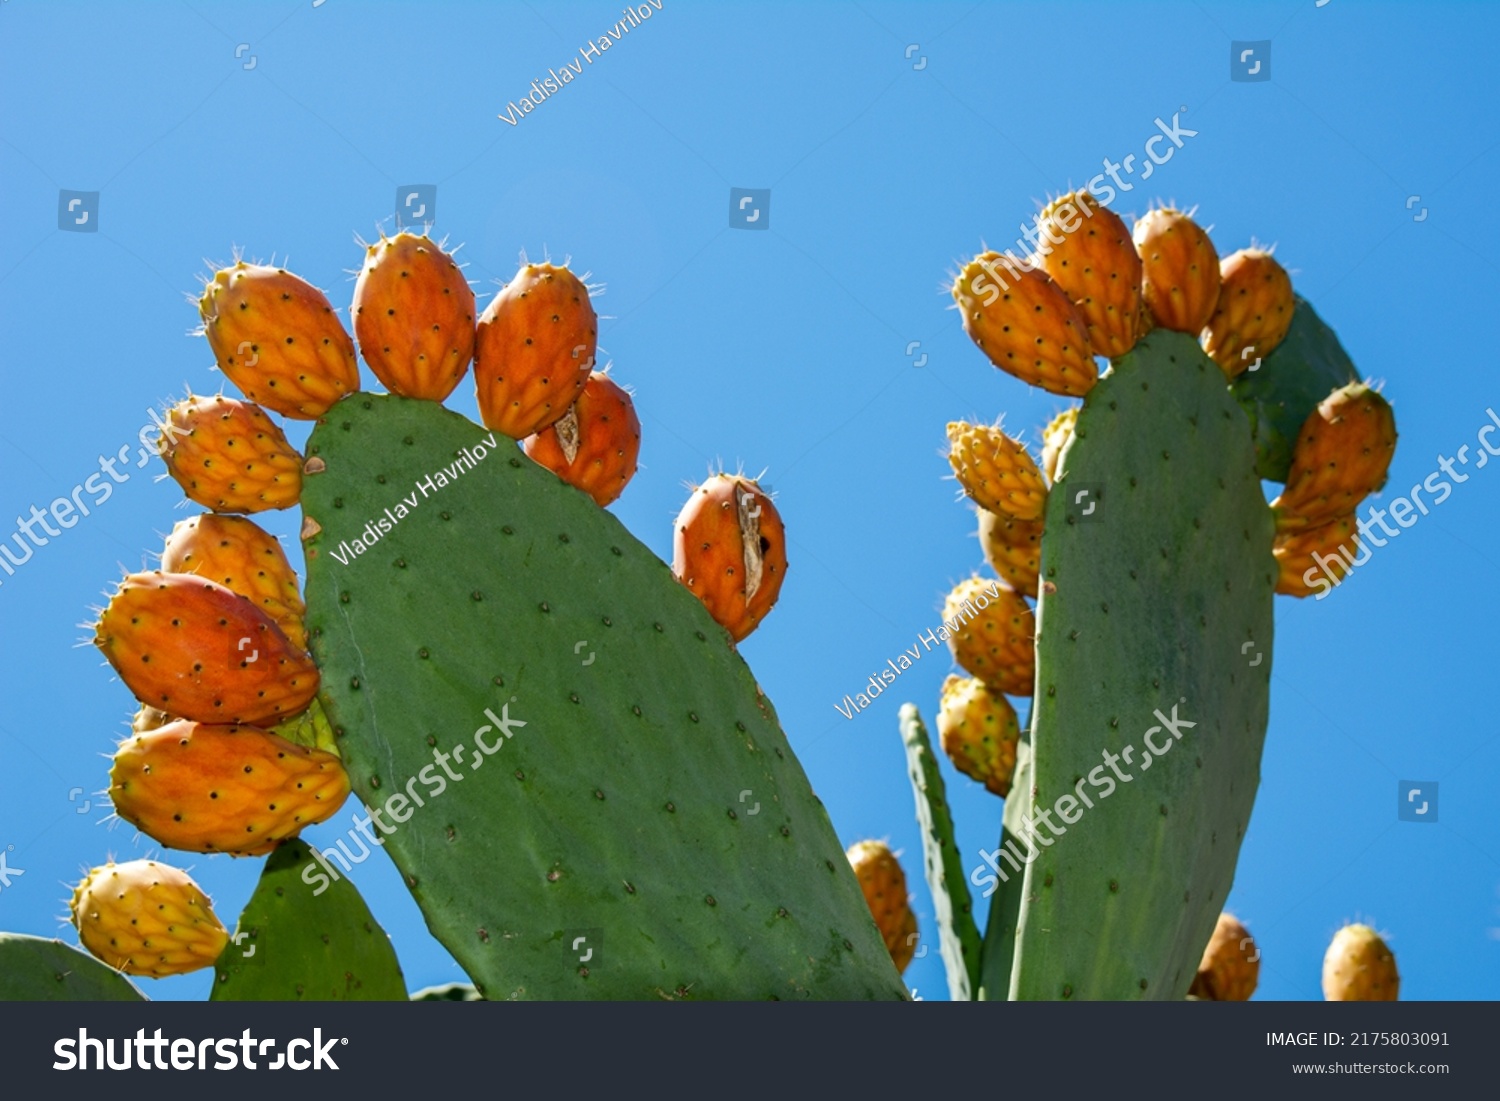 Opuntia Ficus Indica, the prickly pear. Ripe orange and yellow fruits of cactus and green thick leaves with needles. A species of cactus with edible fruits. Barbary fig fruits, cactus spines. #2175803091